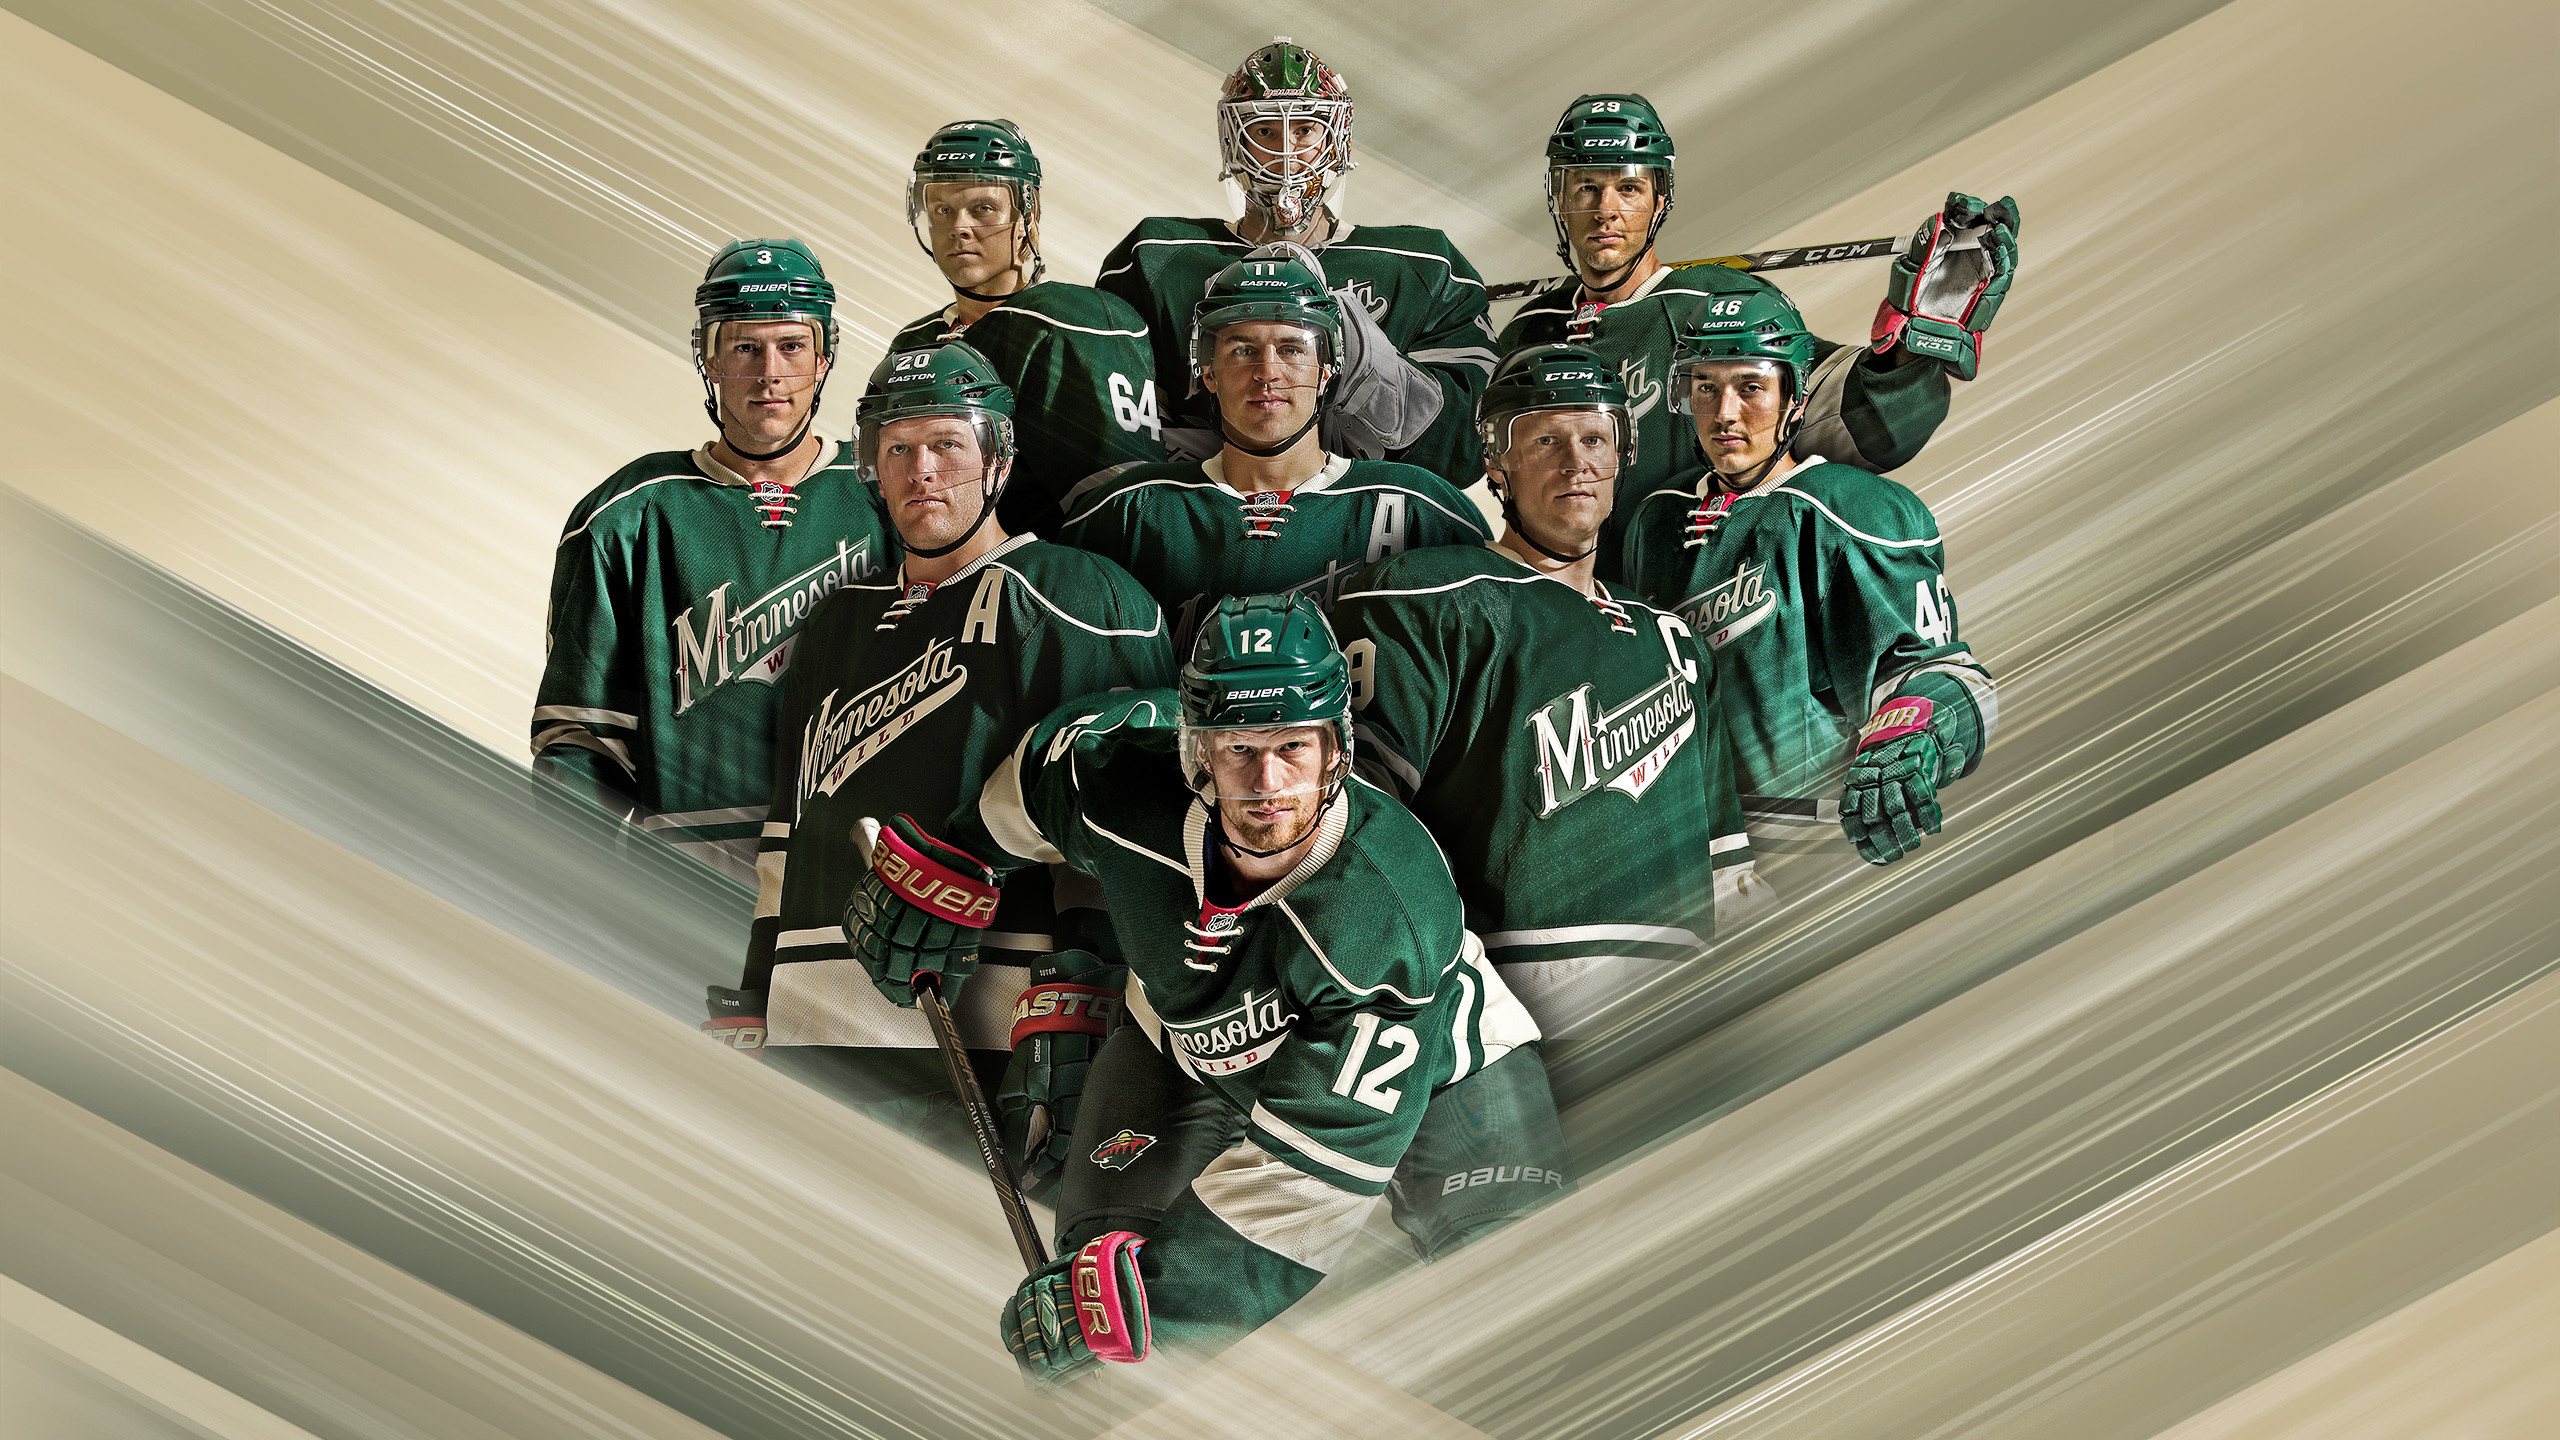 HD Mn Wild Wallpaper (67+ images)